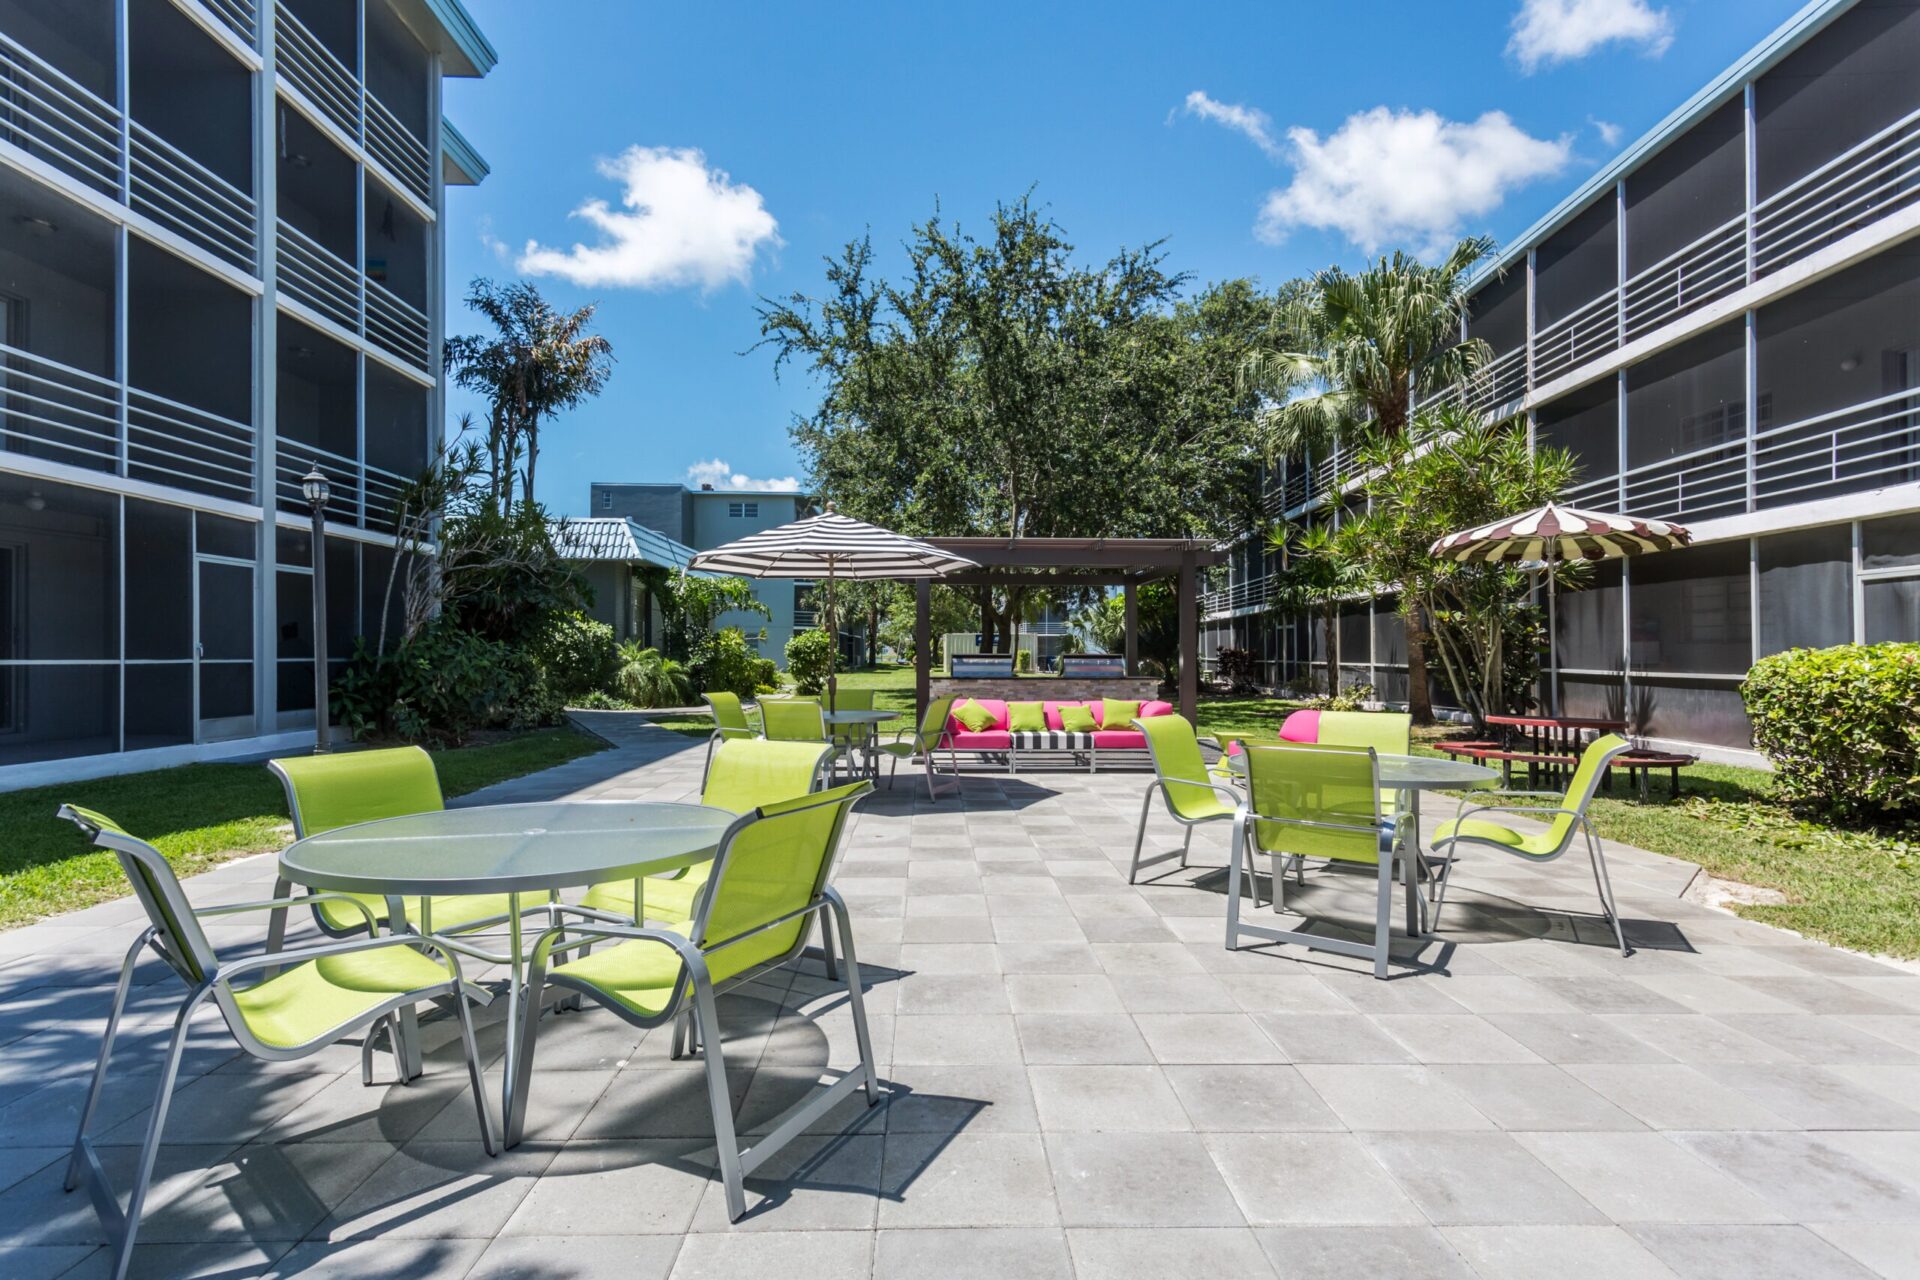 Aventura Oaks outdoor seating with tables and chairs